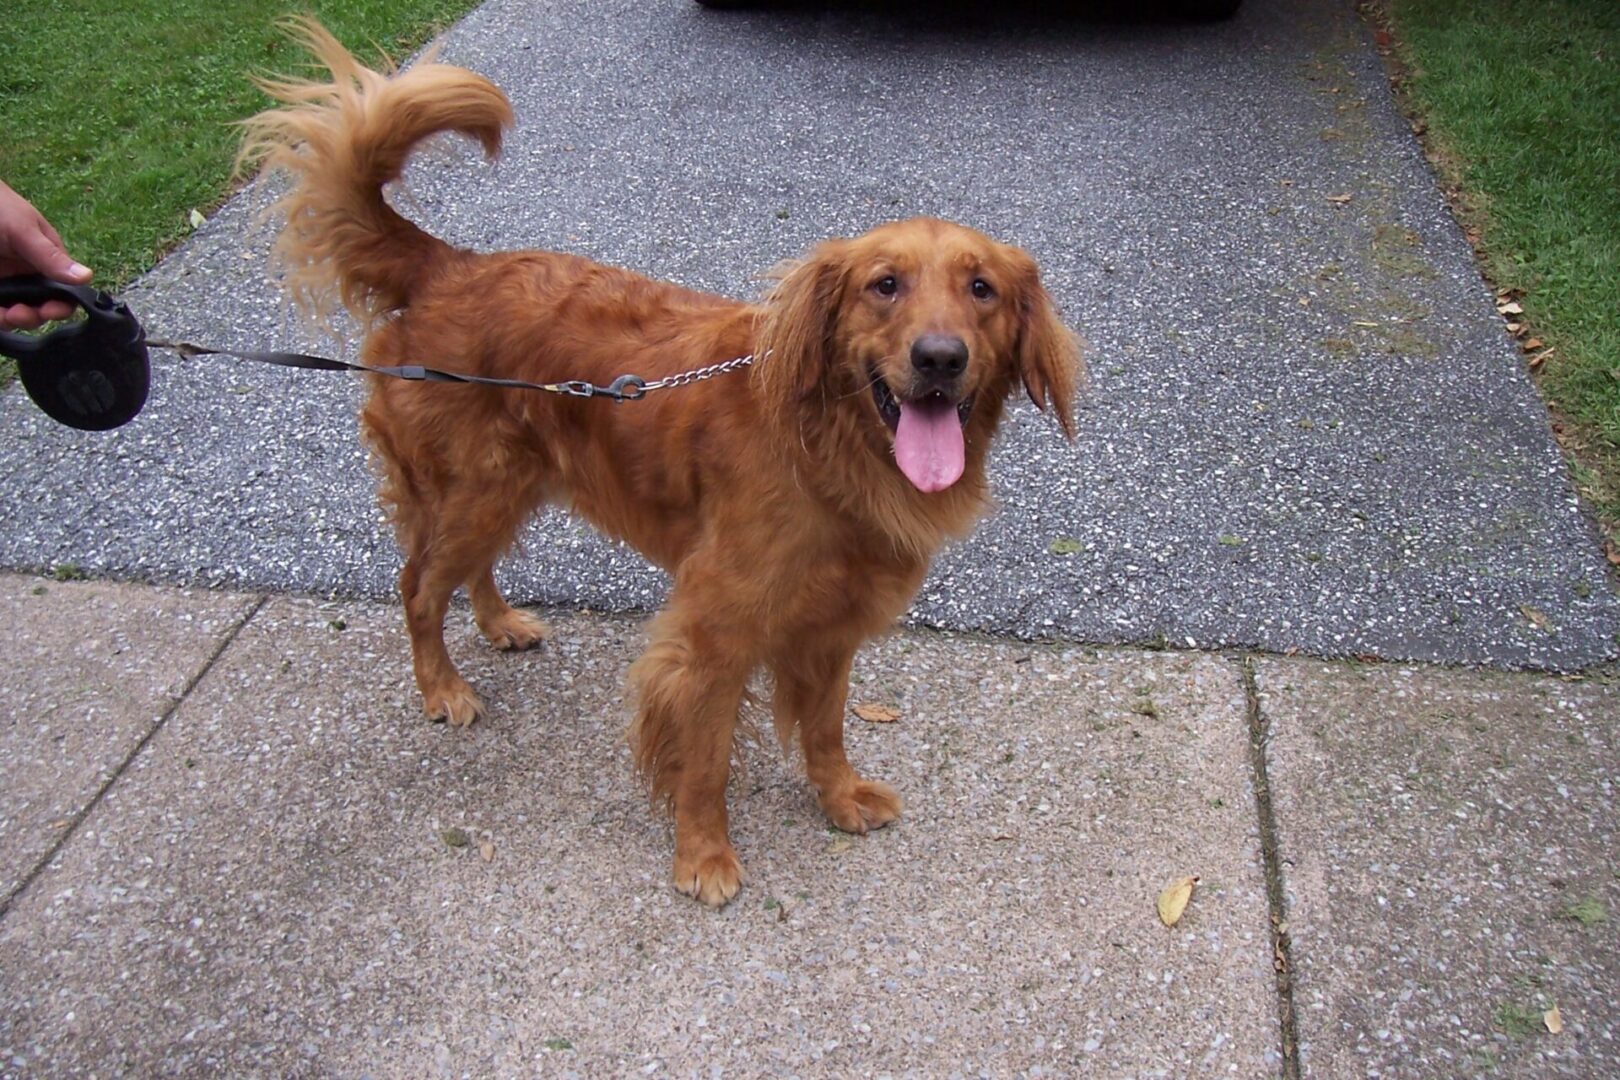 A golden retriever on a leash standing on a sidewalk with its tongue out.